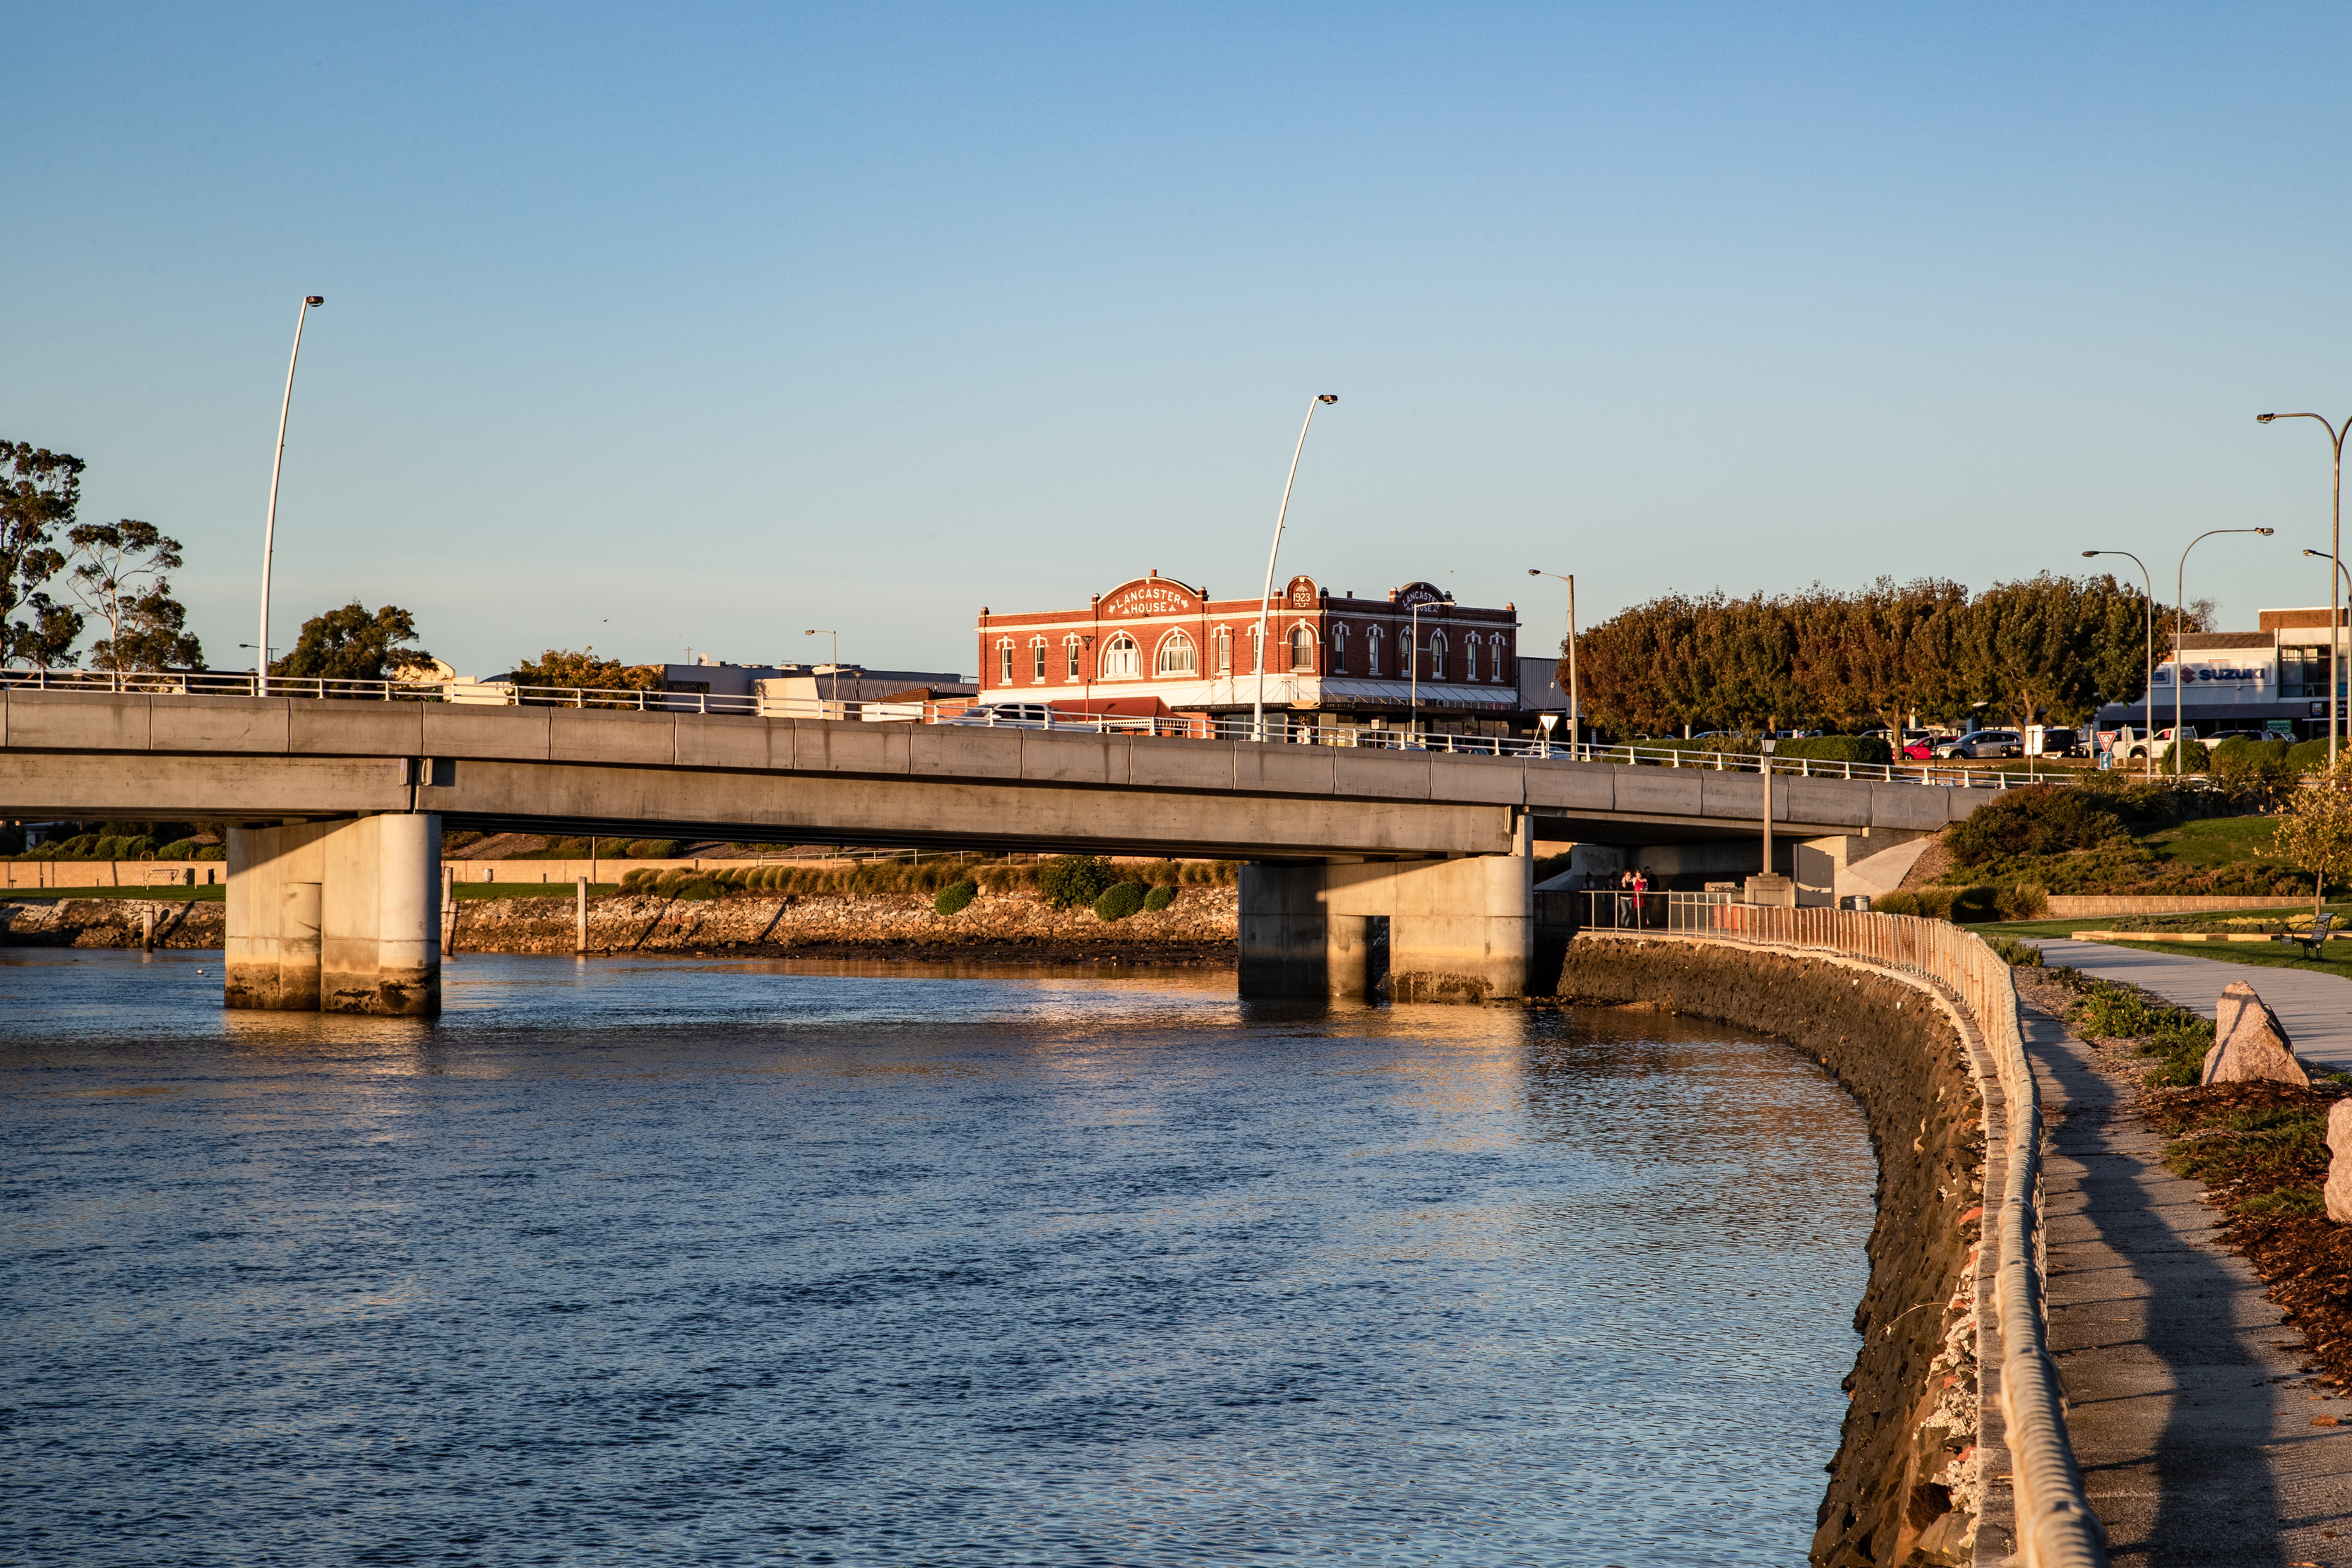 The bustling seaside town of Ulverstone at the mouth of the Leven River captured on a warm sunny morning.